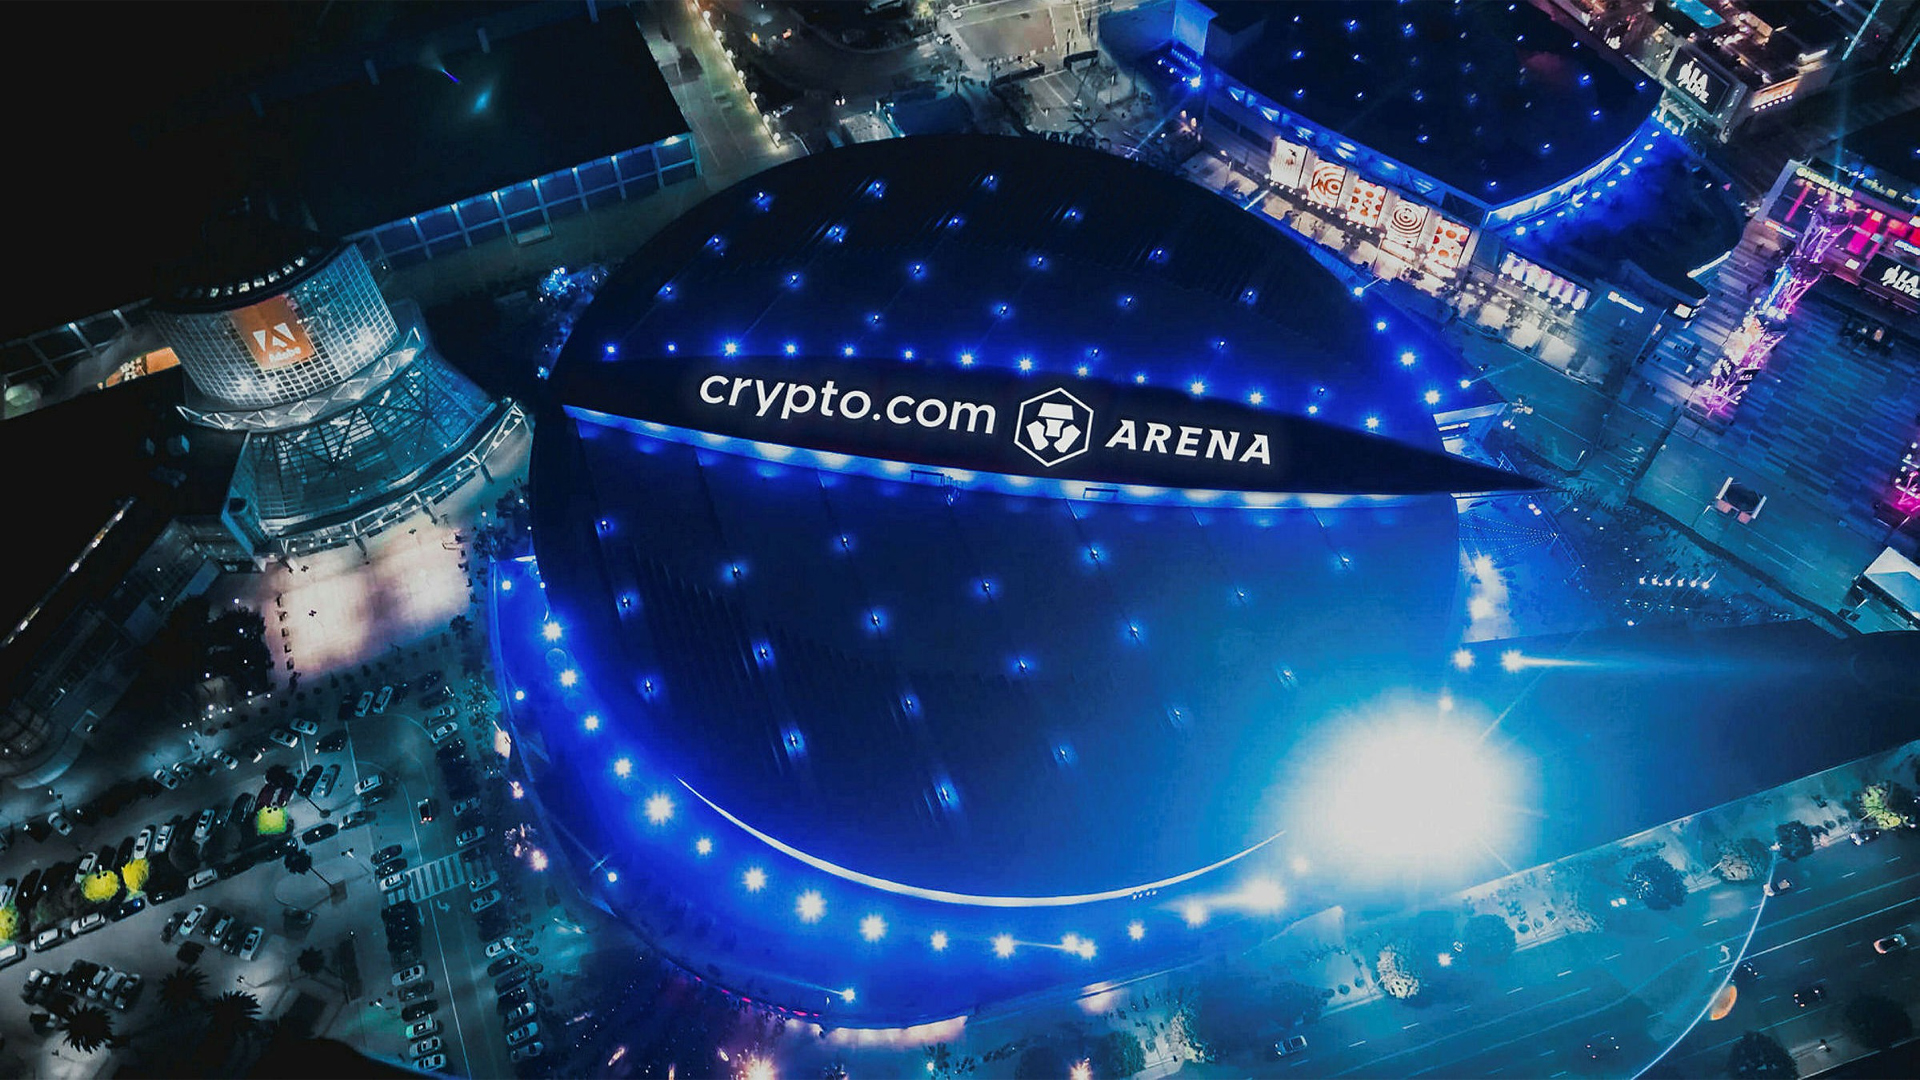 Los Angeles STAPLES Center To Be Renamed Crypto.com In A Reported $700M Deal